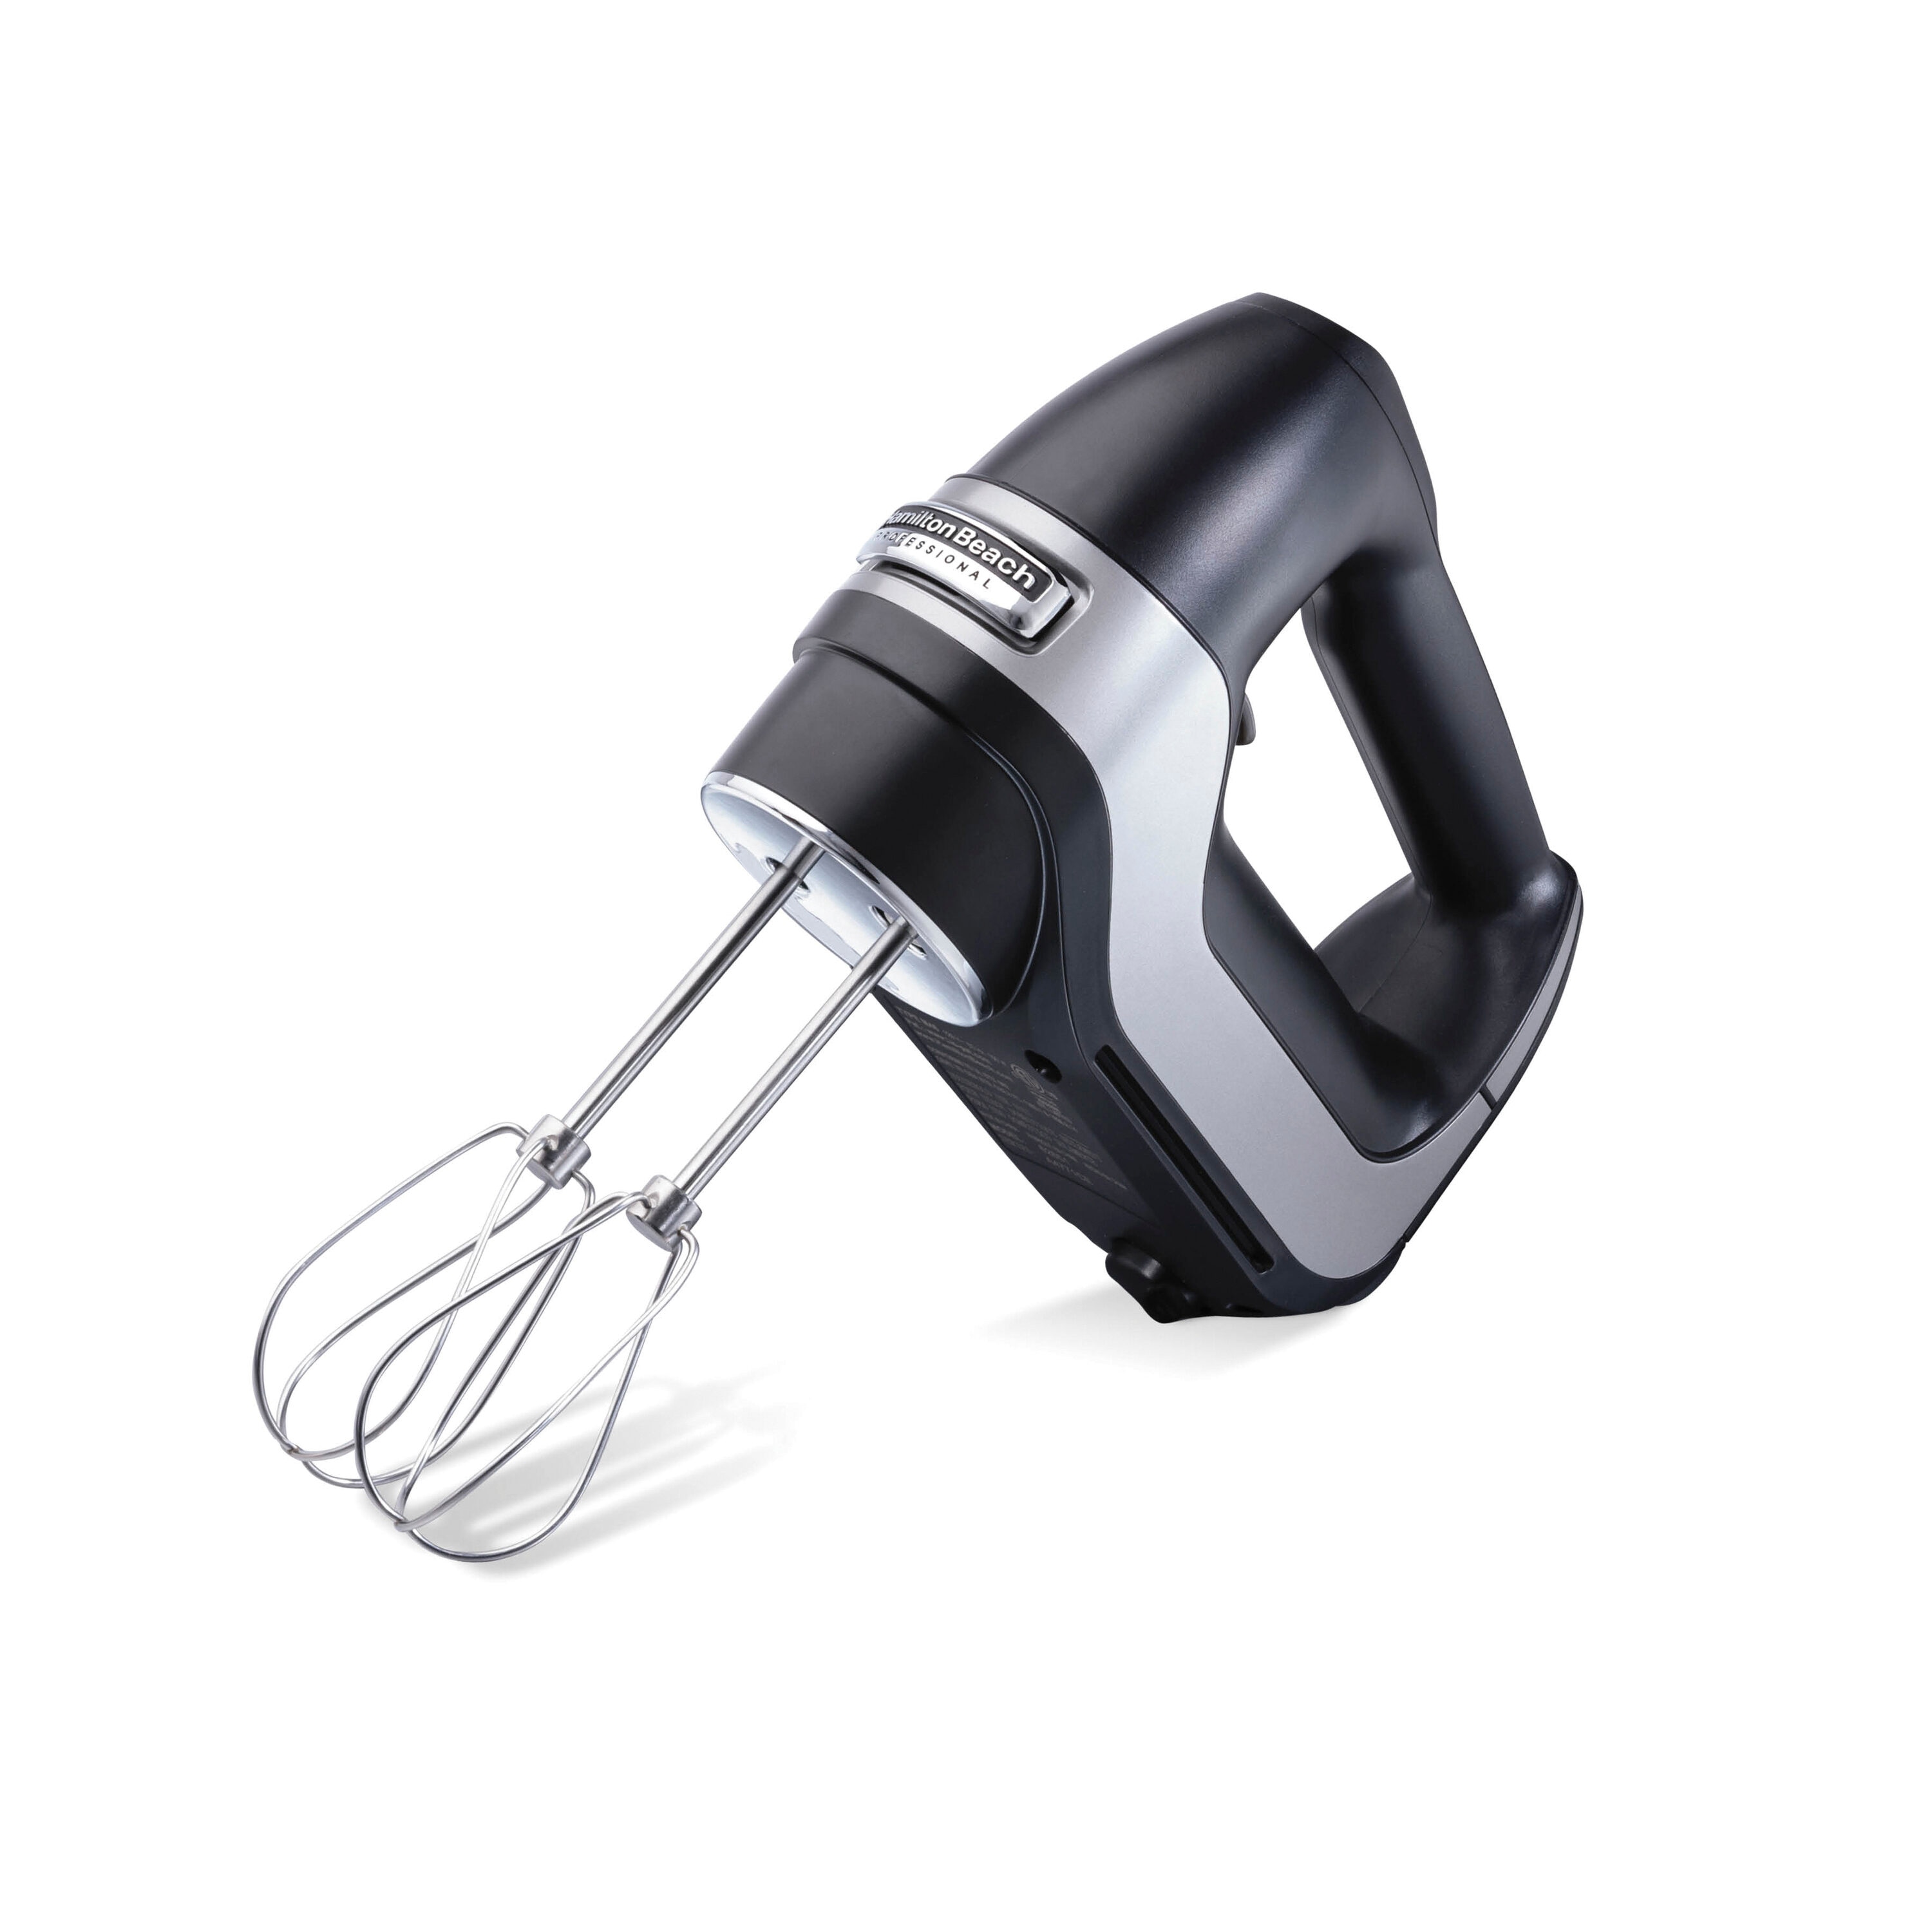 Hamilton Beach 4-in-1 Electric Immersion Hand Blender with